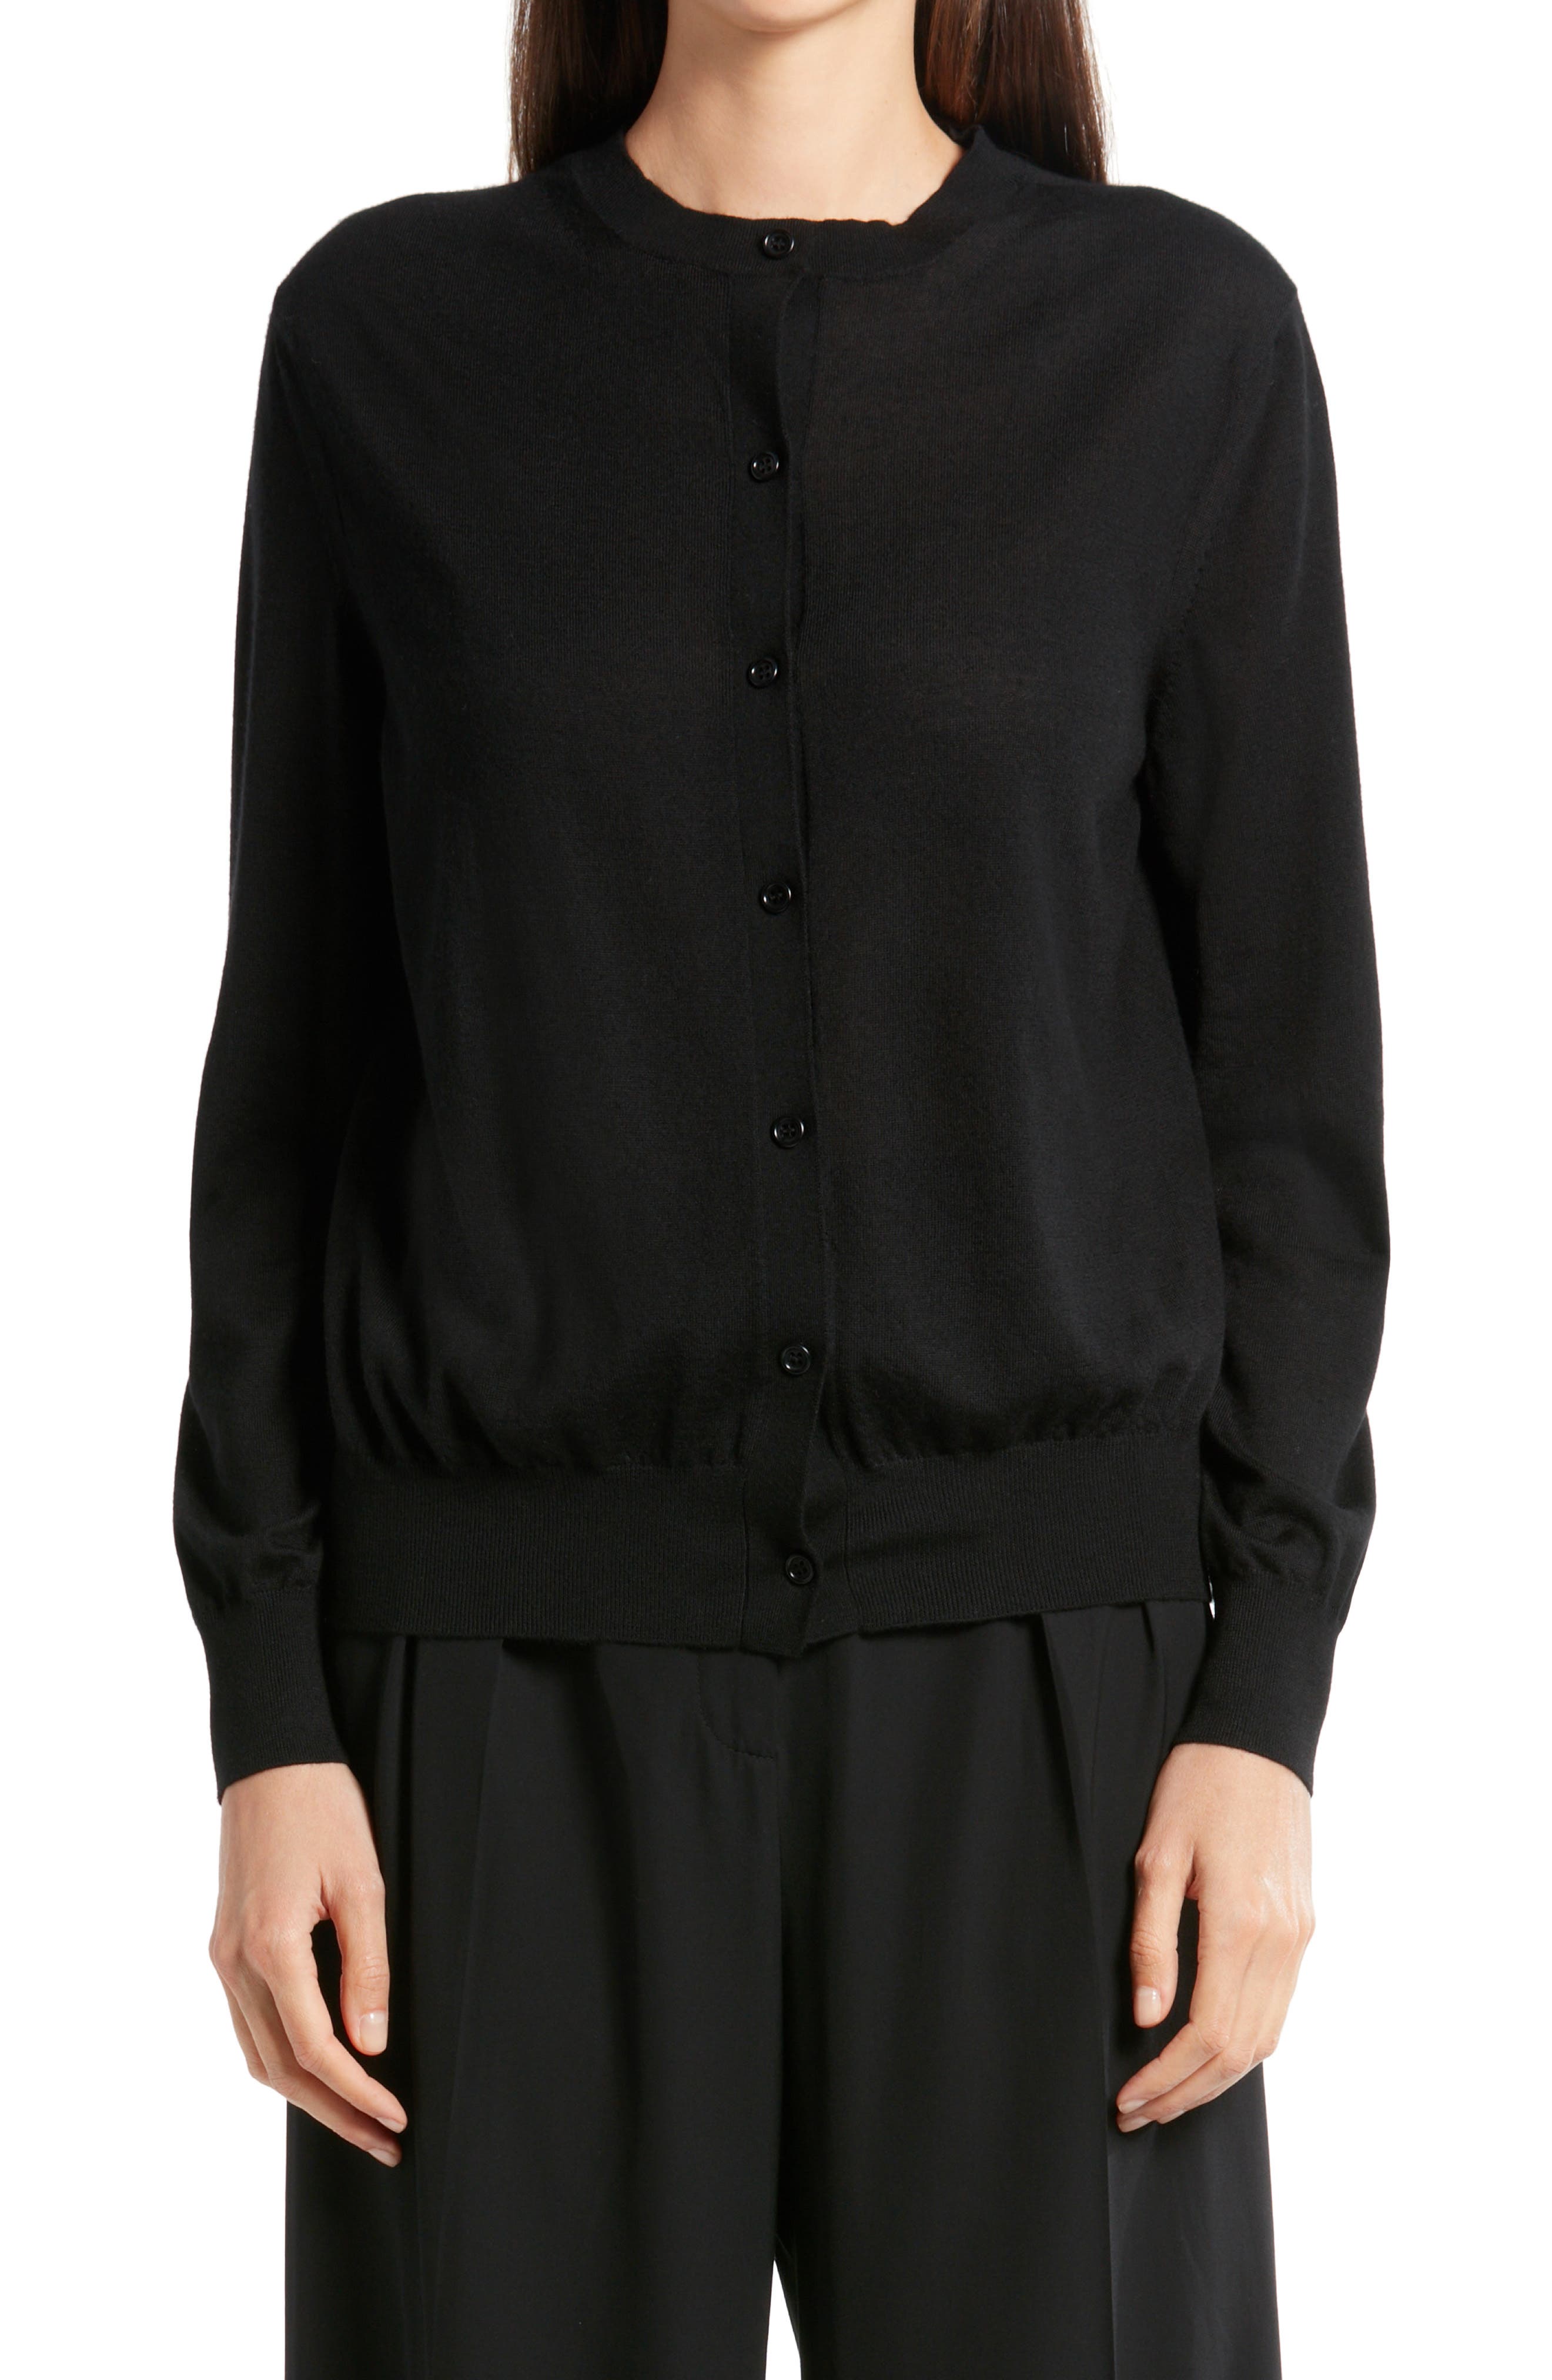 The Row Battersea Cashmere Cardigan in Black